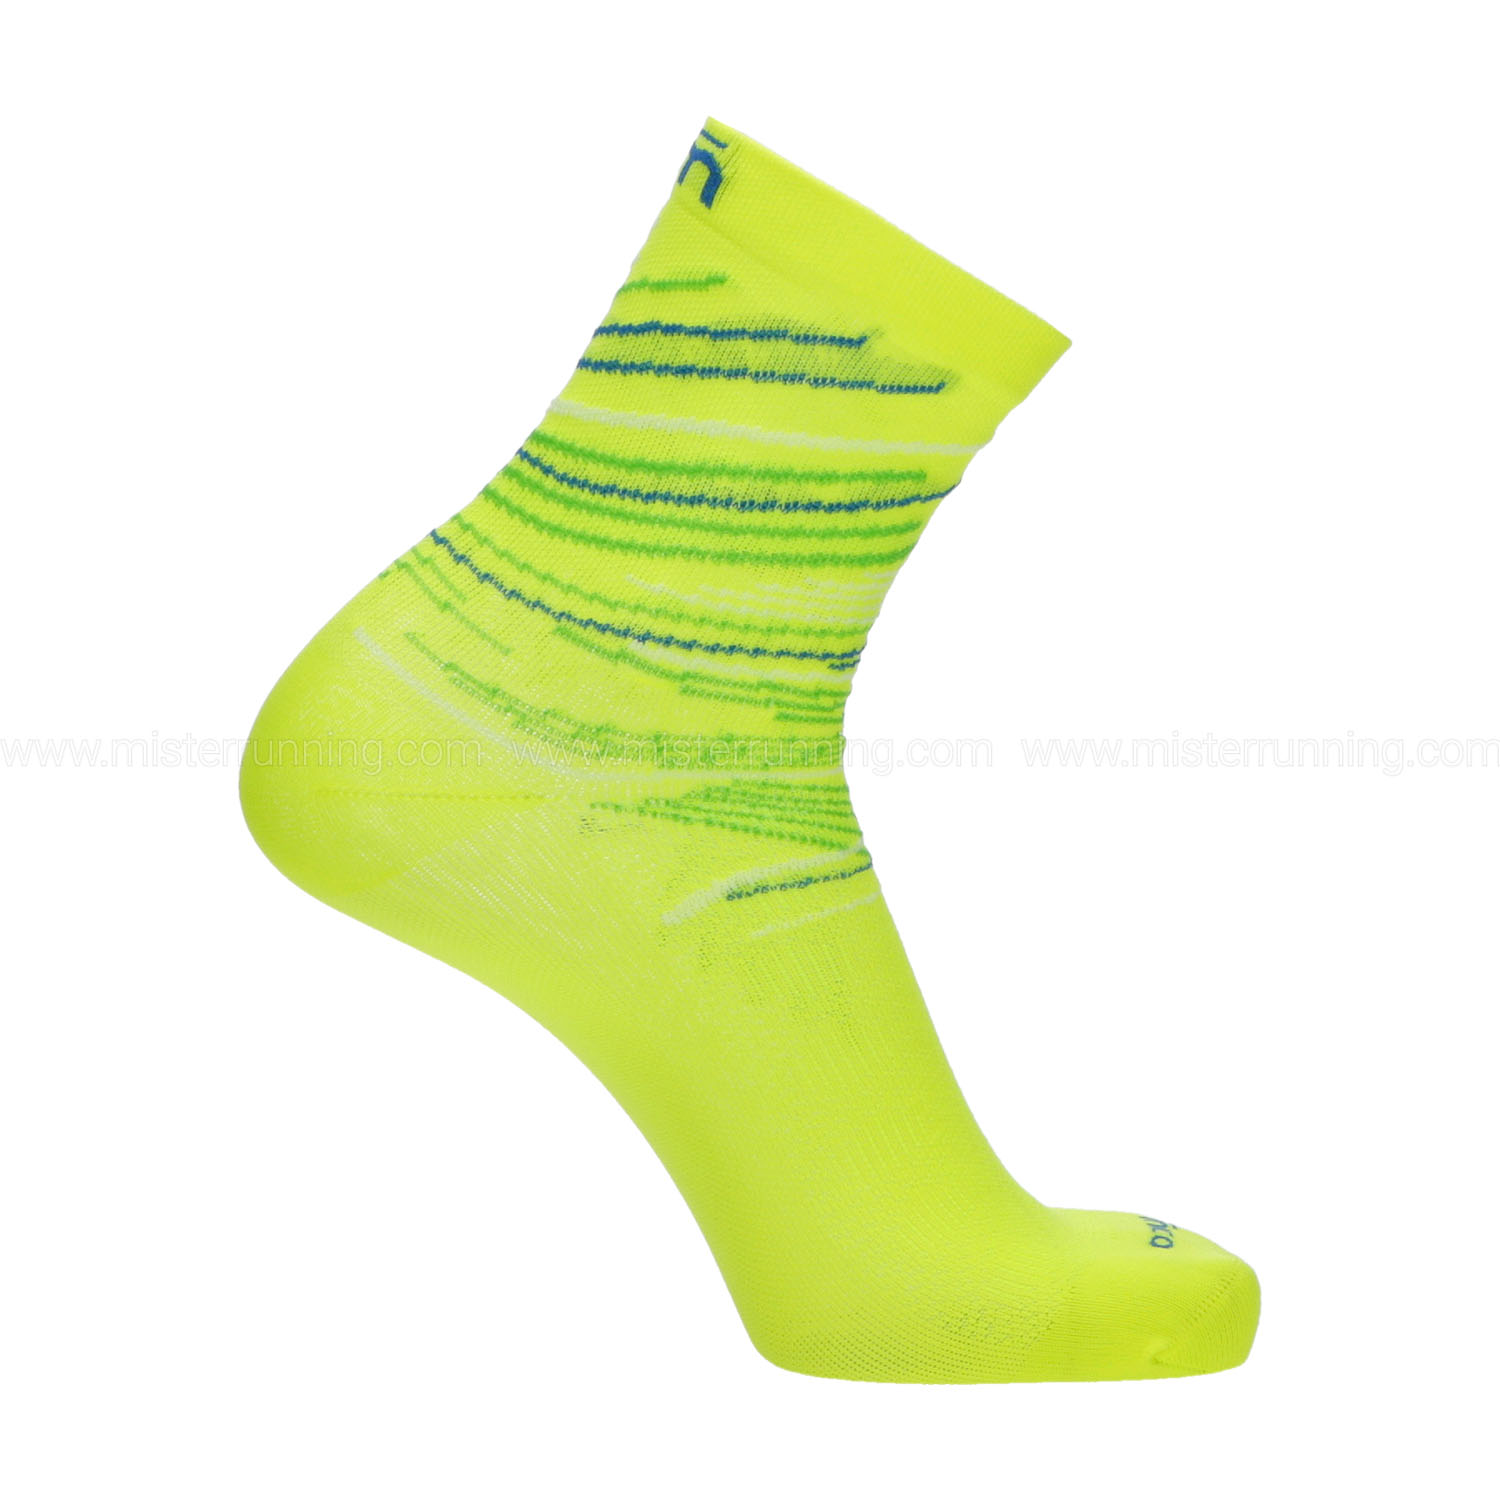 Mico Performance Extra Dry Light Weight Socks - Giallo Fluo